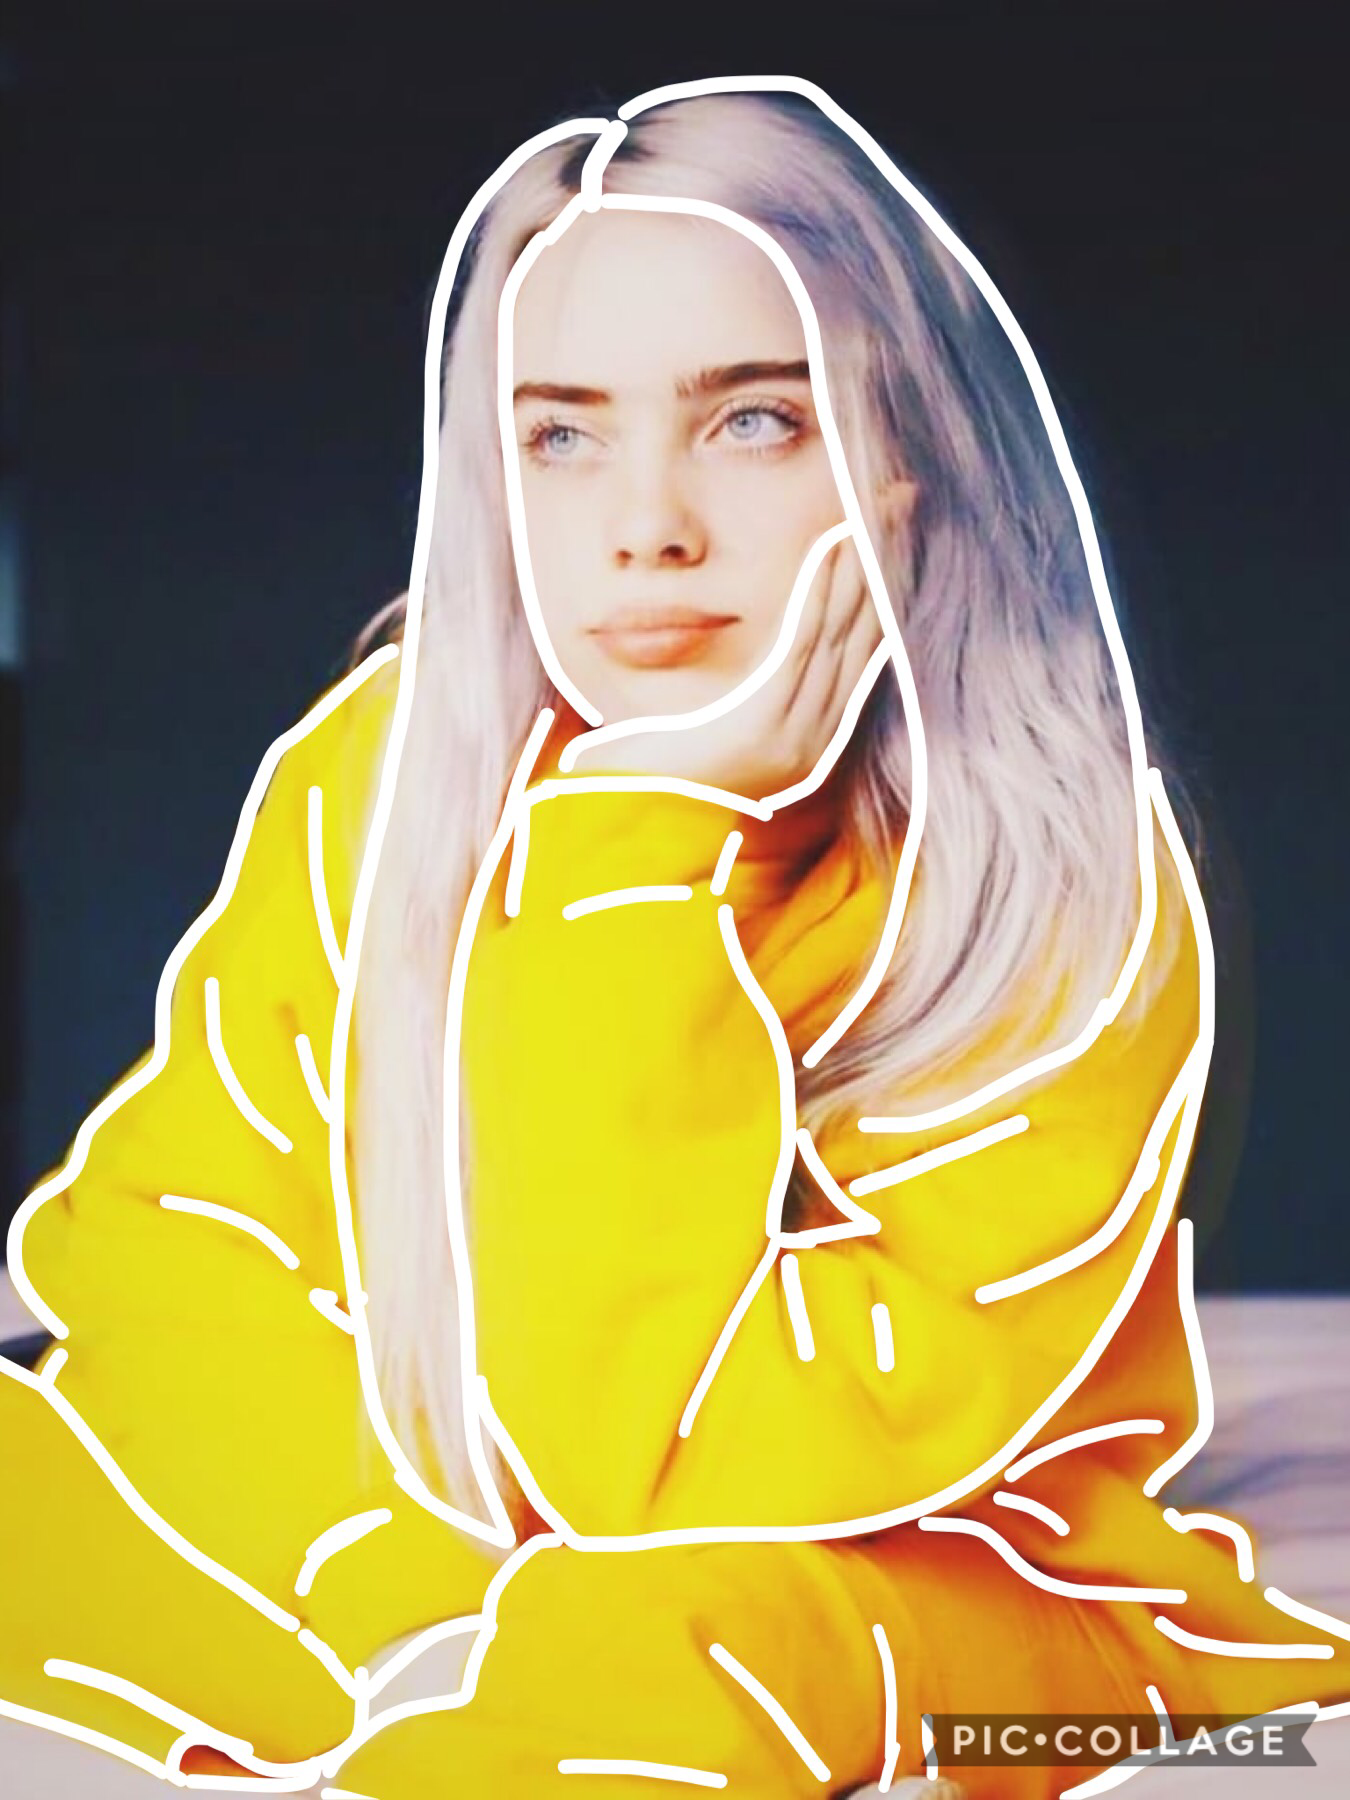 Tappy💜🌈
Billie Eilish 4 ever! I know I’m doing simple edits for now, might do more detailed ones later tonight probably around 11 o clock PST. Also QOTD: What state do y’all live in? (Or country) AOTD: I LIVE IN THE AMAZING SUNNY CALIFORNIA! ☀️ lol! 